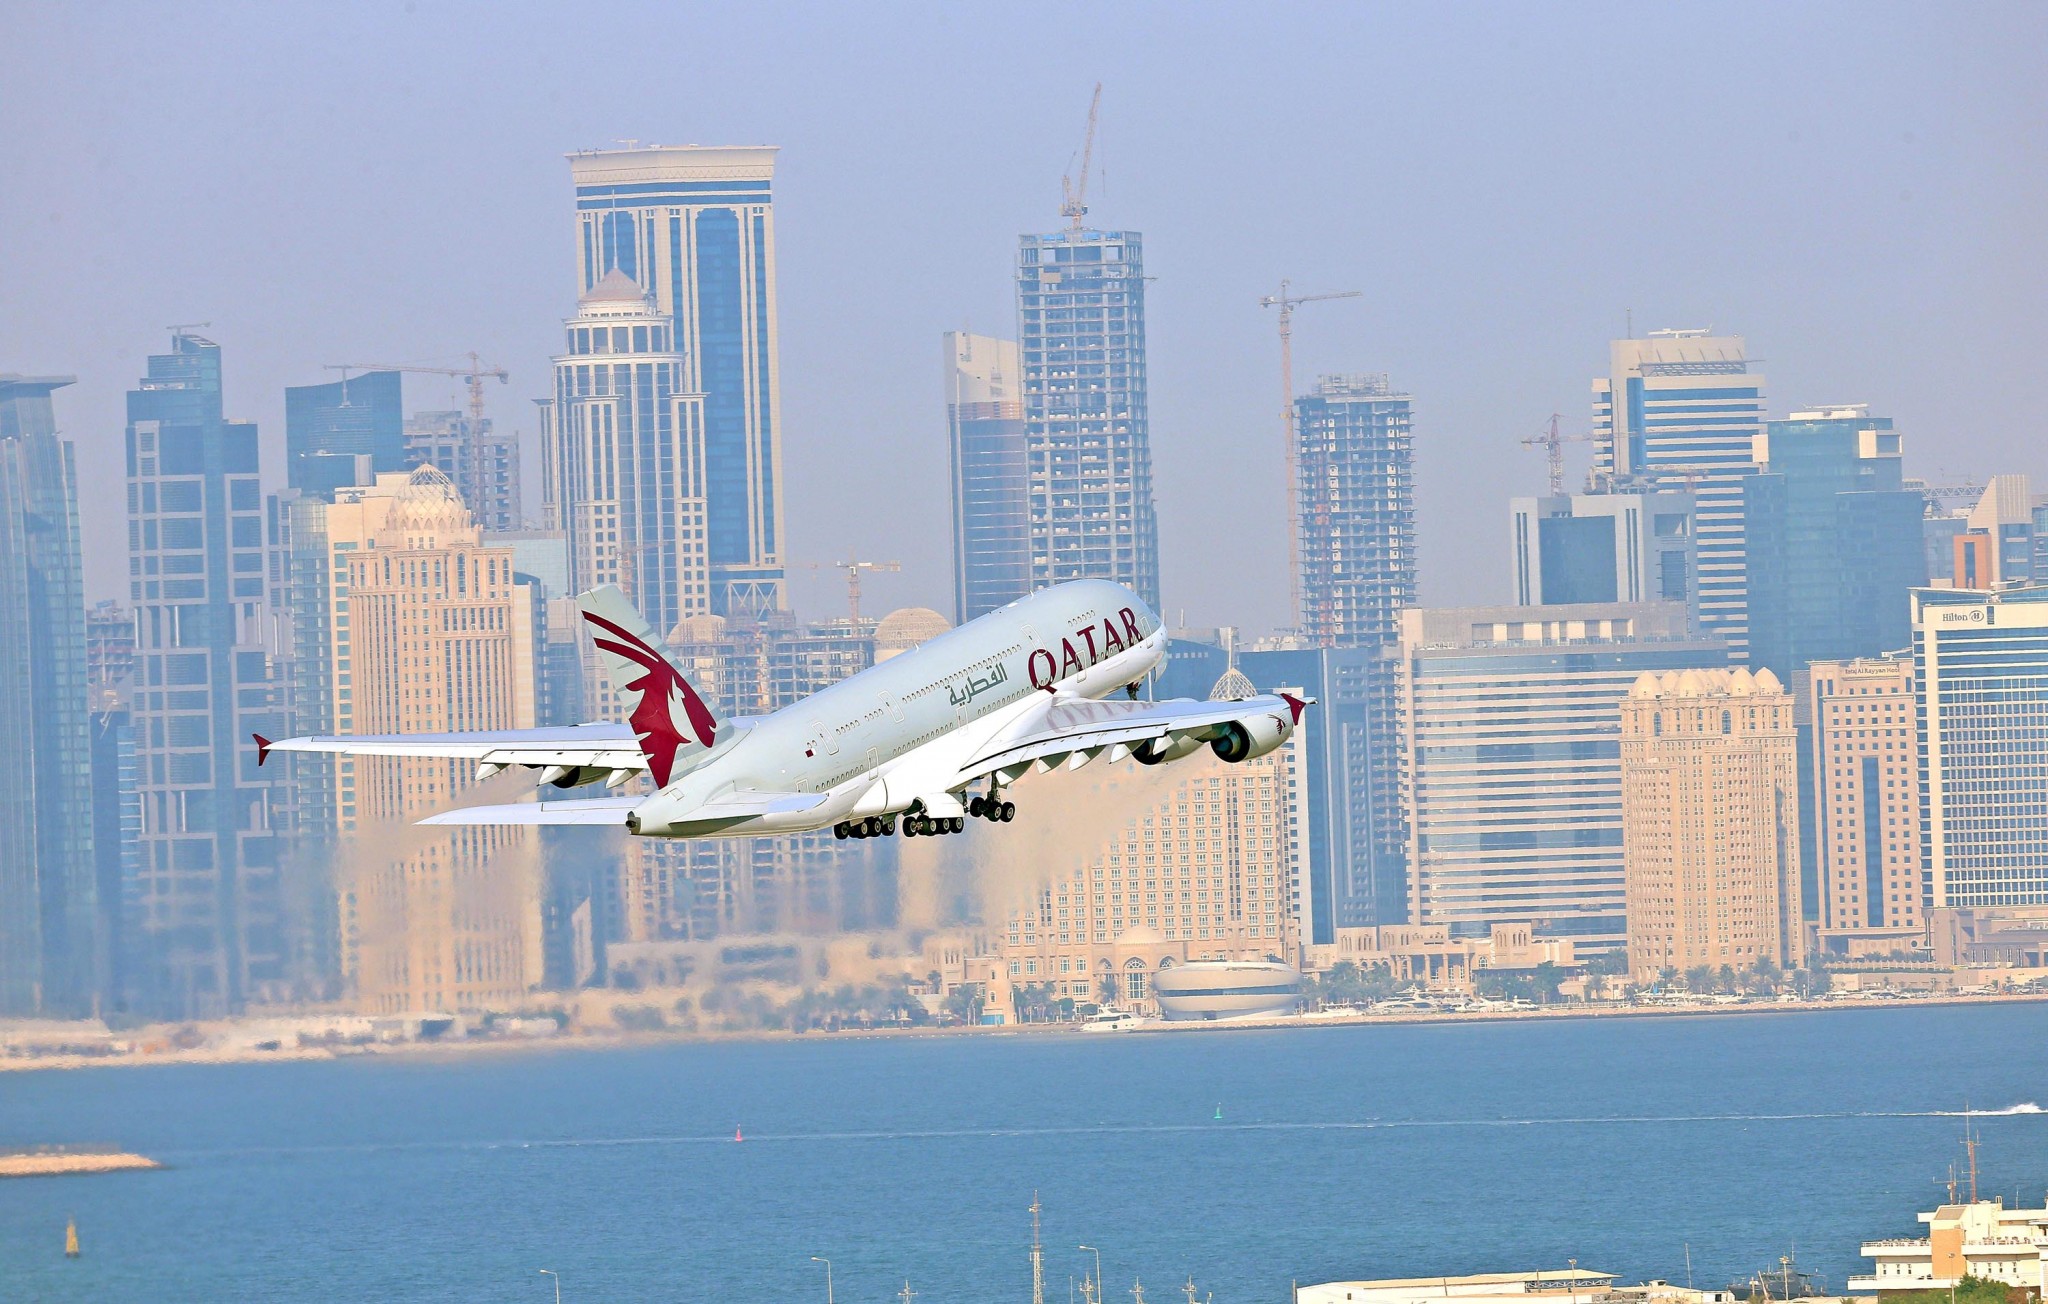 Fitch: Qatar Airways strategy shows trend to closer airline ties